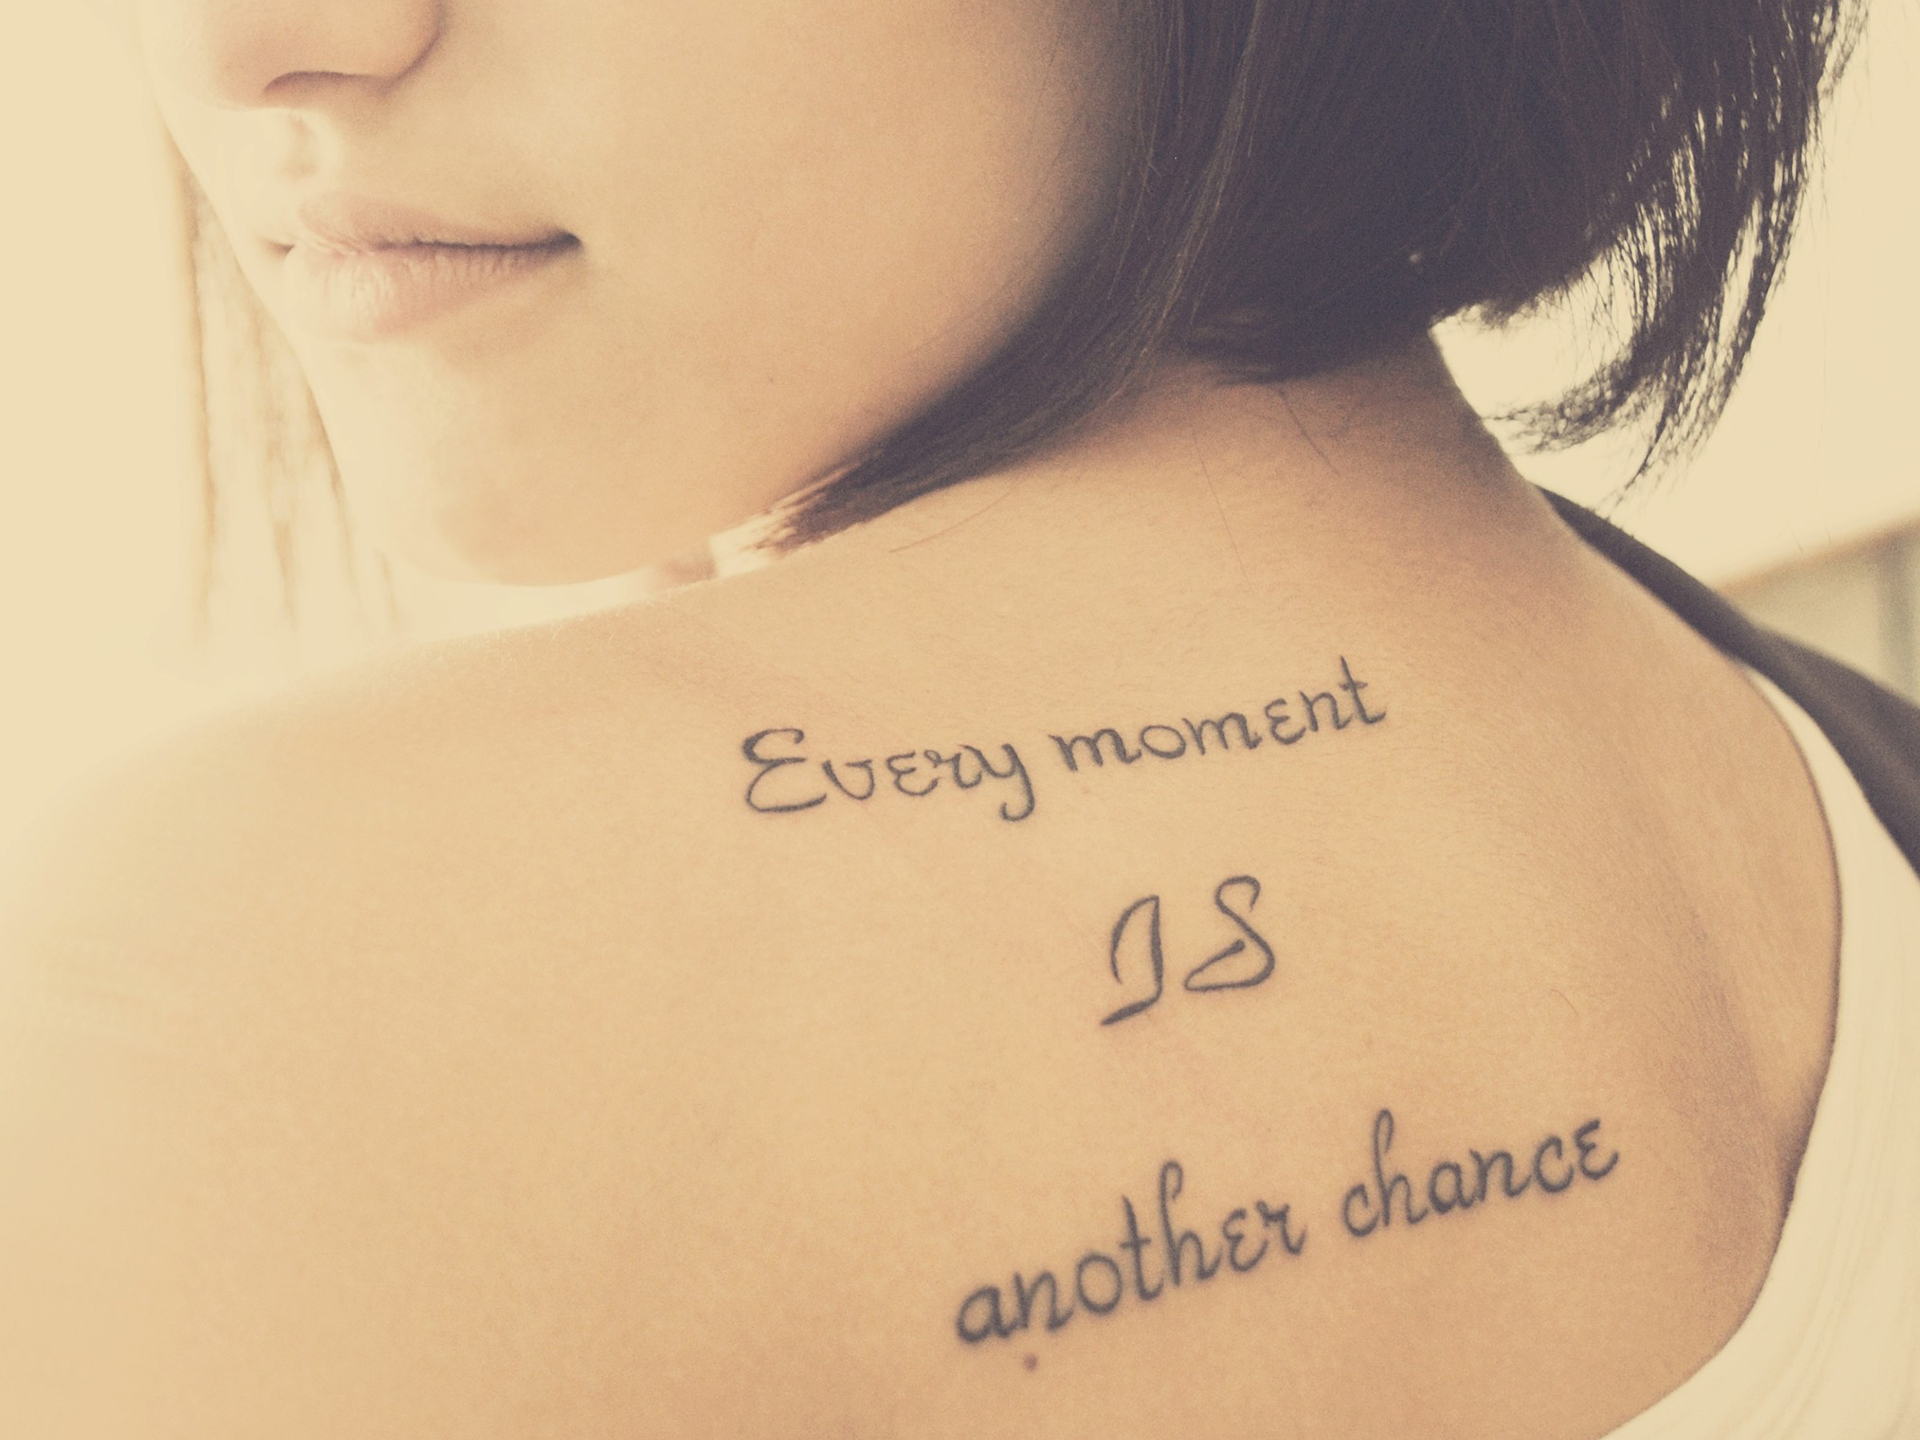 Every Moment is Another Chance Tattoo Wallpaper